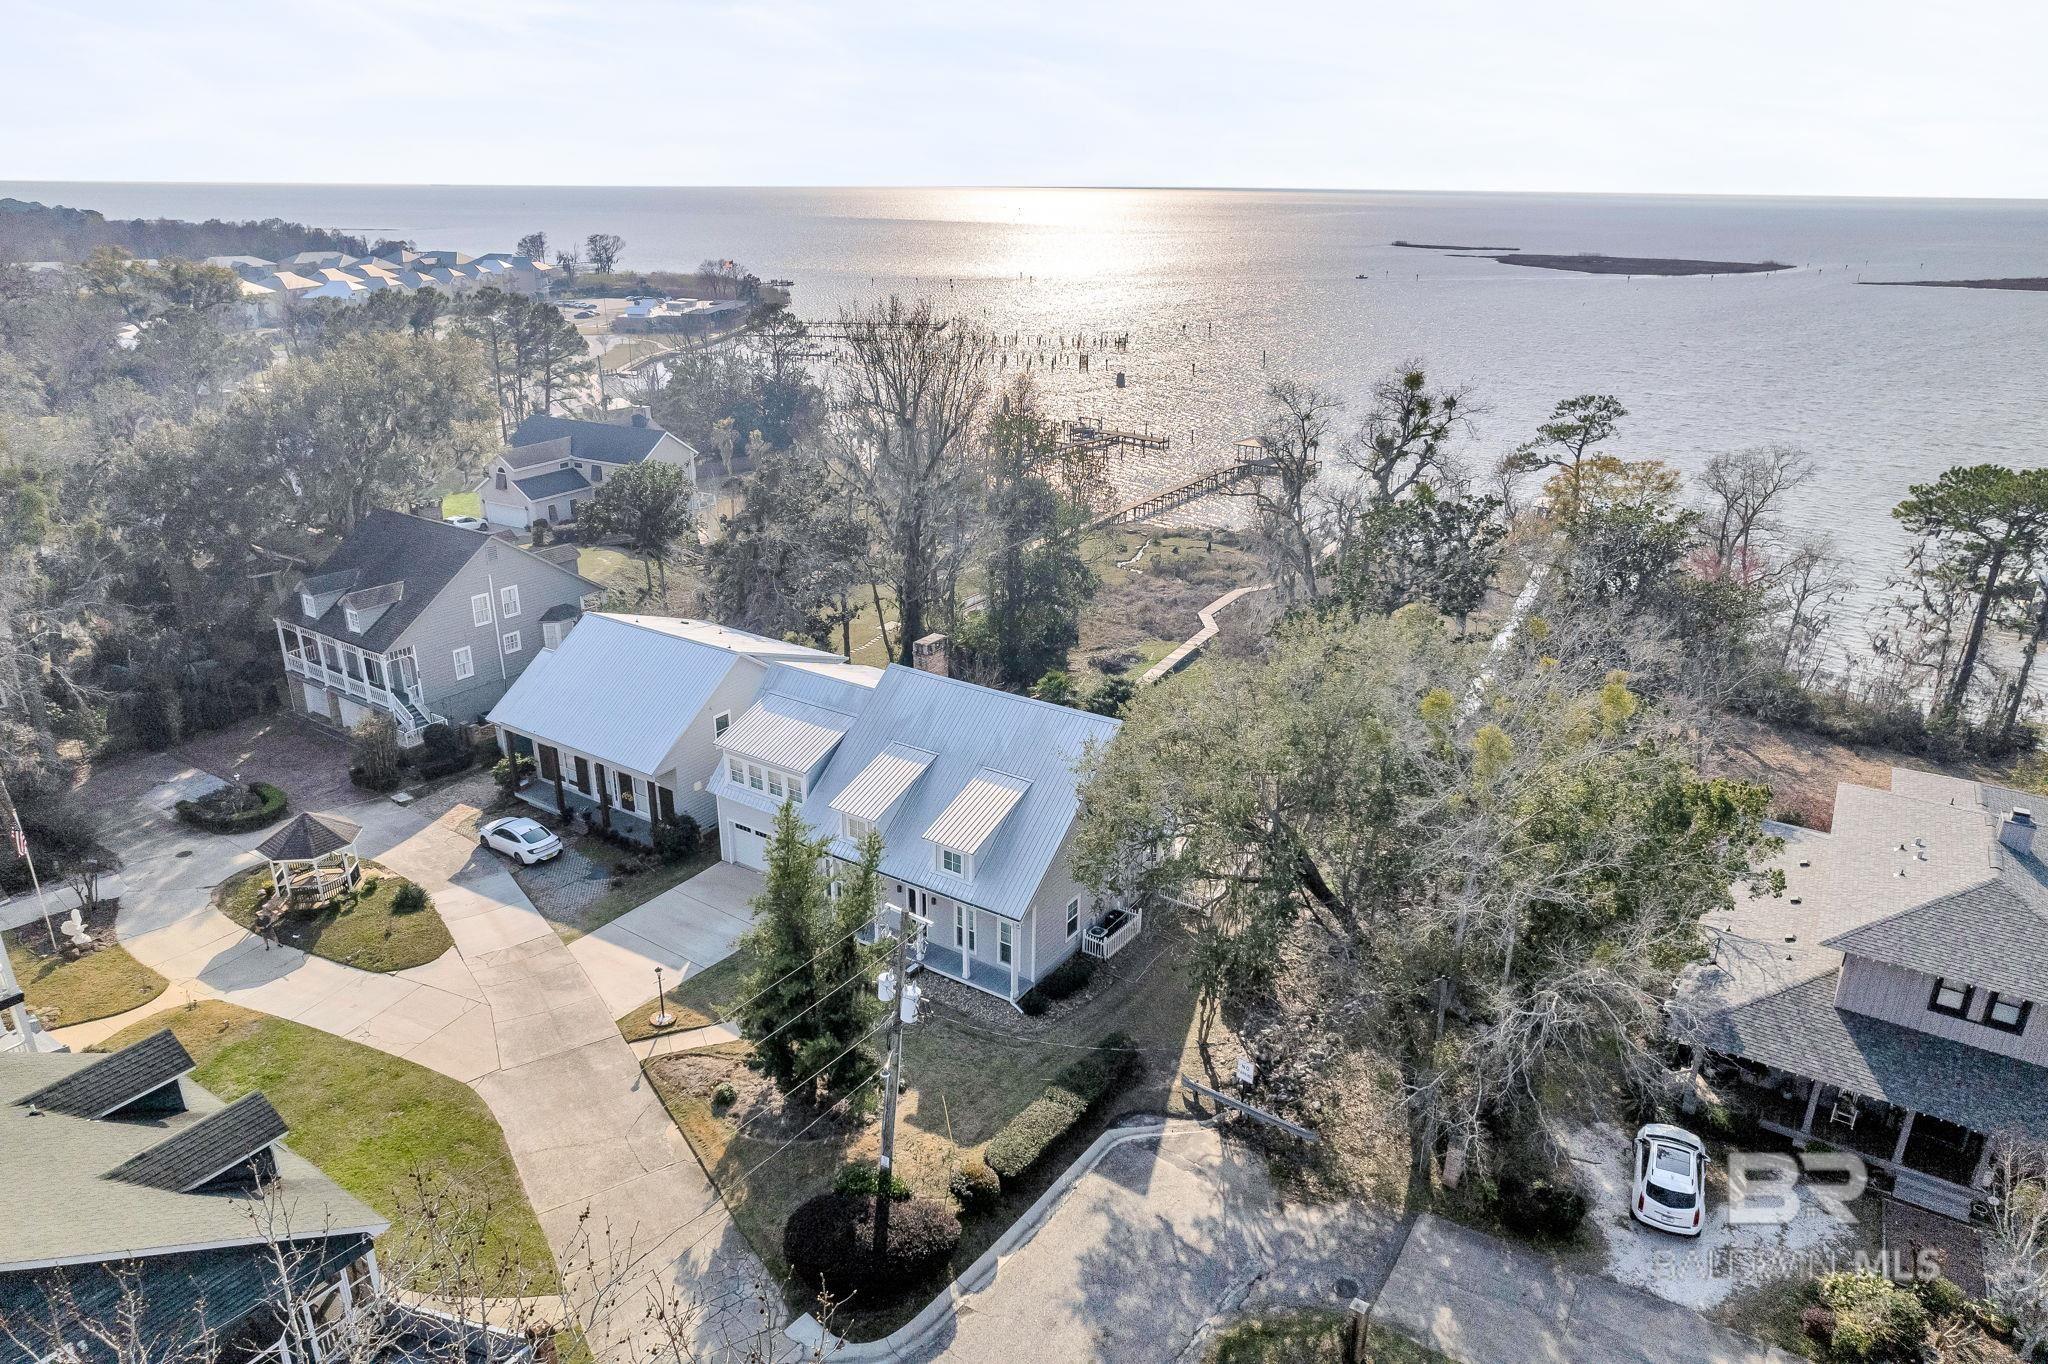 Welcome to waterfront serenity in Daphne, AL! This 3284 sq ft immaculately updated 4-bedroom, 3.5-bathroom home offers unparalleled views of Mobile Bay's Eastern Shore sunsets from your private pier and back porch. Nestled on a high-elevation .53 acre lot with 65' of waterfront, the home features a modern kitchen with soft close cabinets, granite countertops, and beautifully upgraded bathrooms. Recent upgrades, including a new HVAC system (2024), Pella windows, and fresh interior paint, enhance its allure. Additional highlights include a separate office/den, hardwood floors, spacious closets, plantation shutters, sprinkler system . With easy access to shopping, Downtown Daphne, Mobile, and Bay Front Park, residents also enjoy privileges at the Lake Forest Golf Course, pools, clubhouse, and tennis courts. Your dream coastal lifestyle awaits!